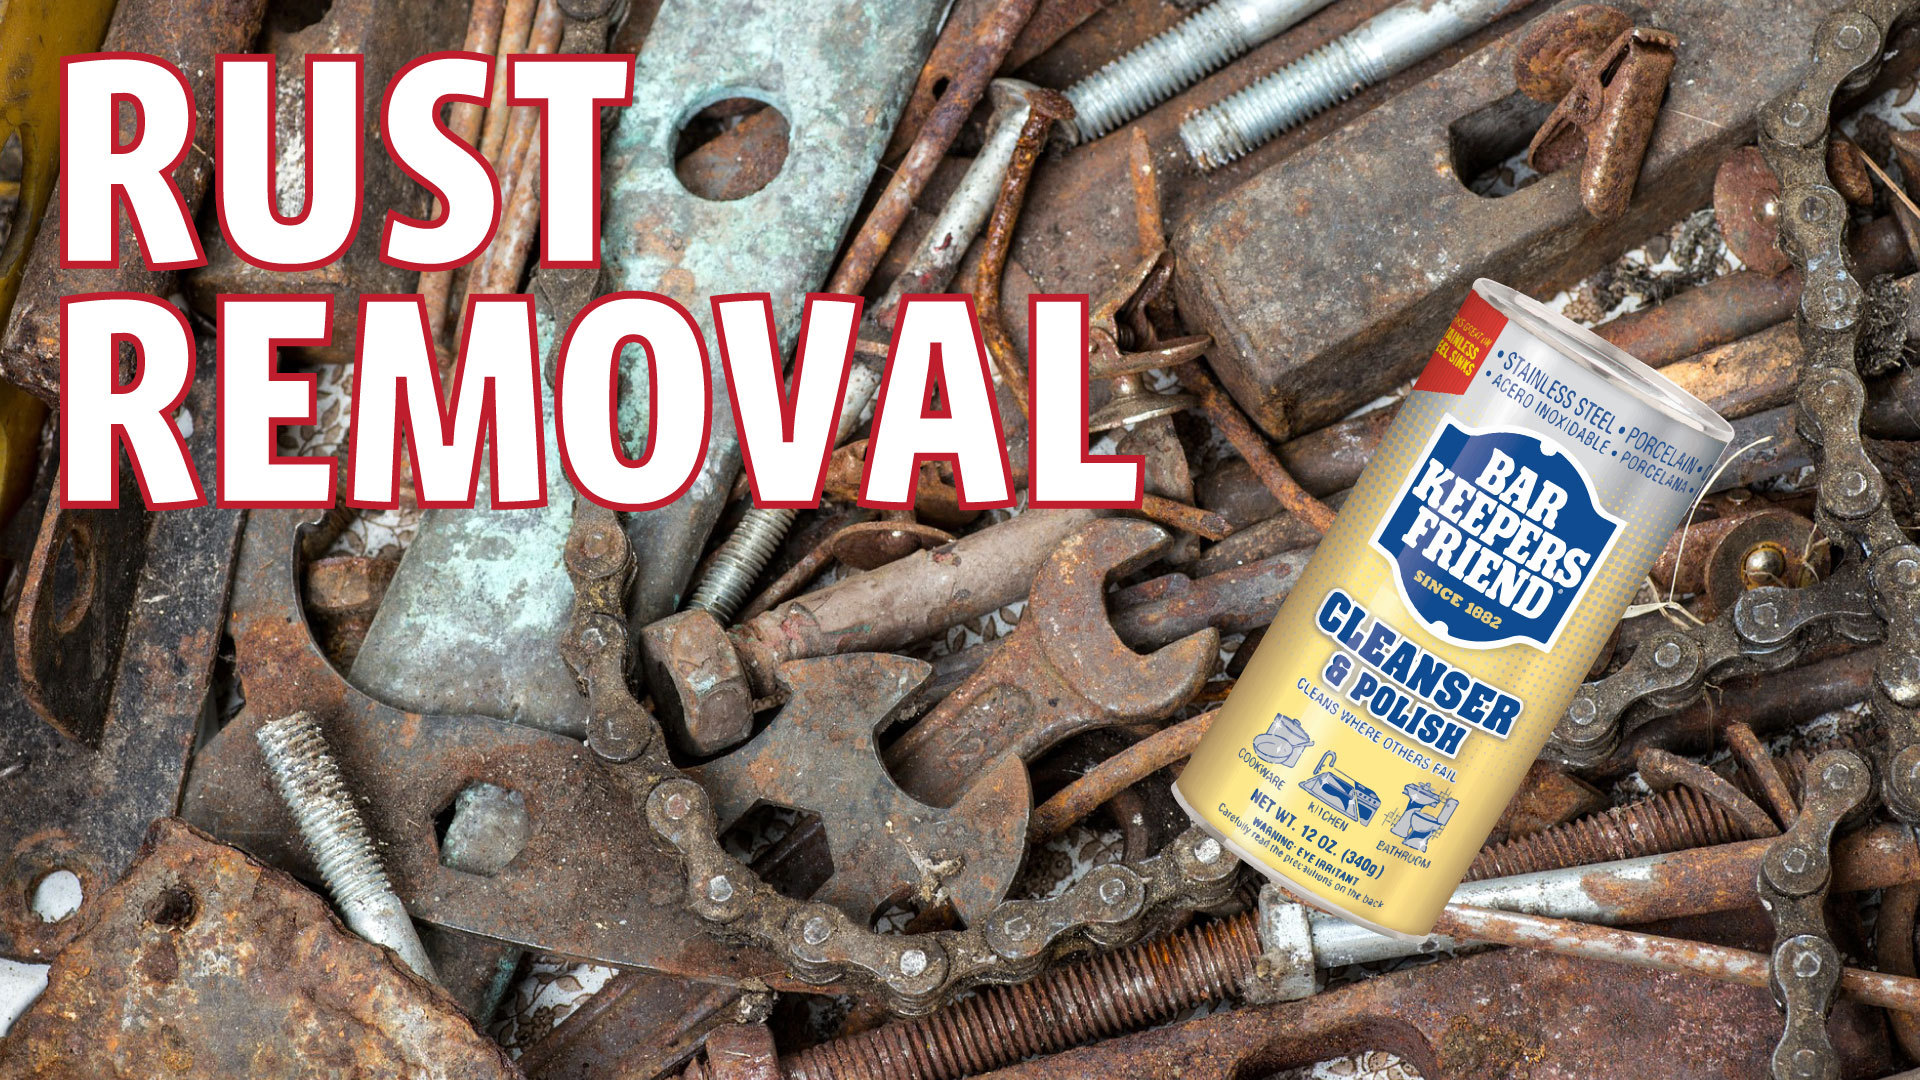 Get rust. Rust removal. Rusty like вода. Rust Cleaner. Cleans the Bath from Rusty Stains.